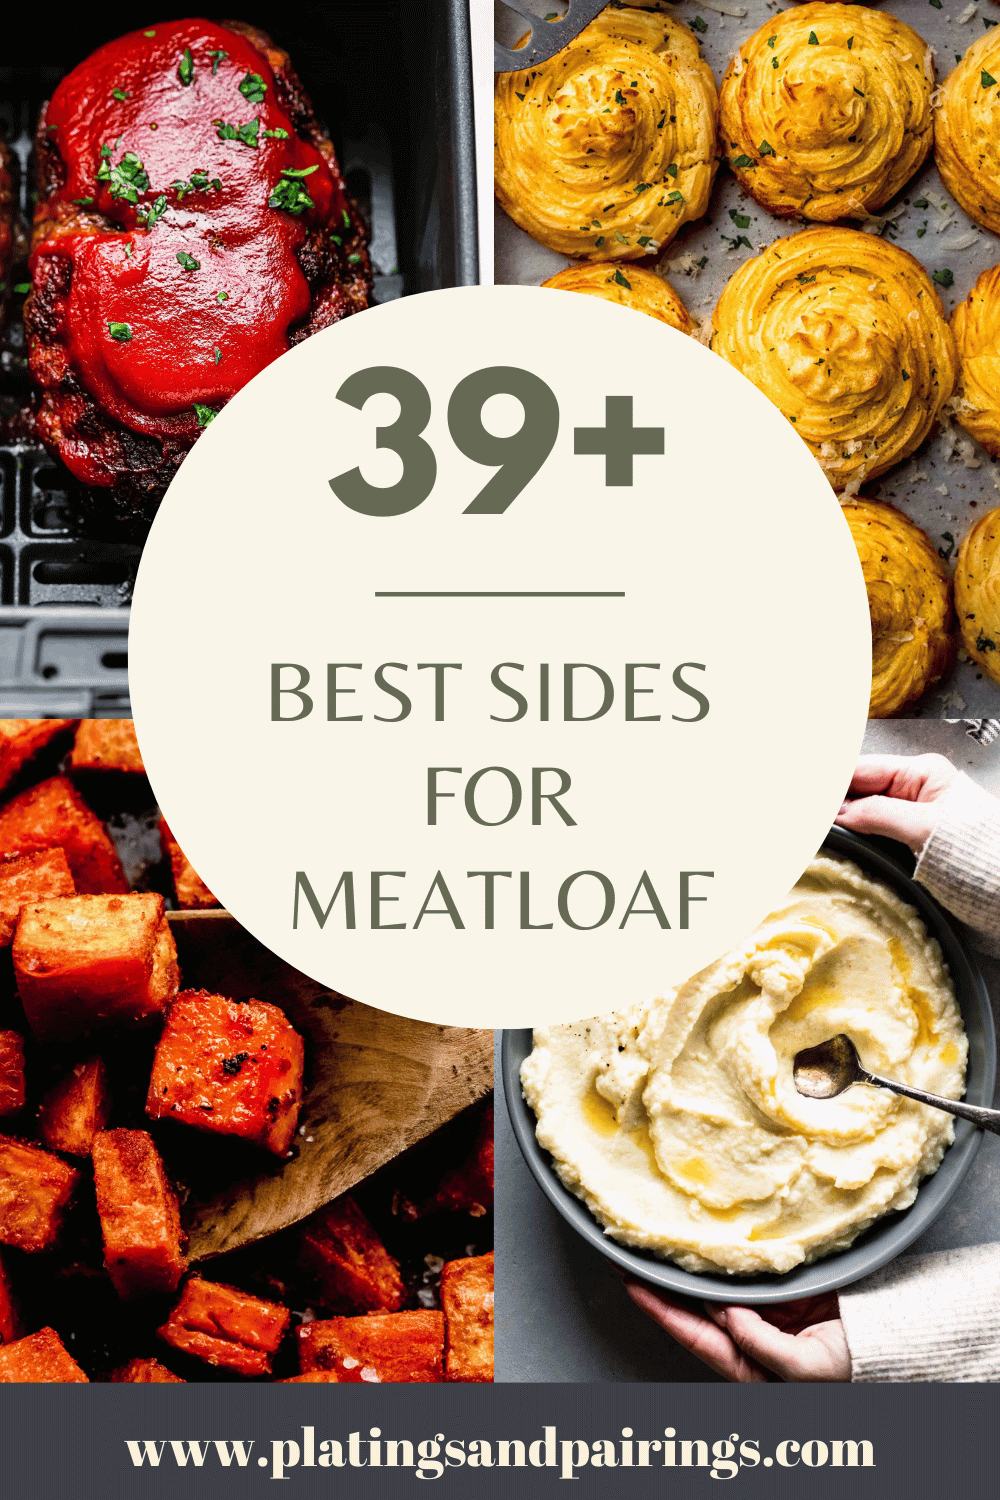 Collage of sides for meatloaf with text overlay.